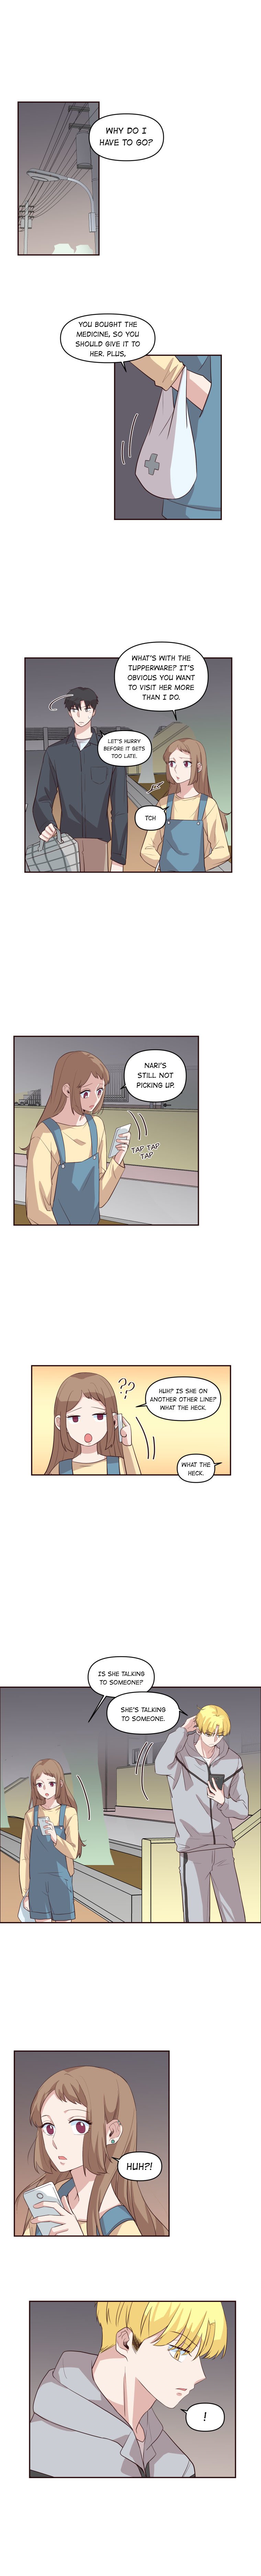 The Housewife vol.1 ch.28